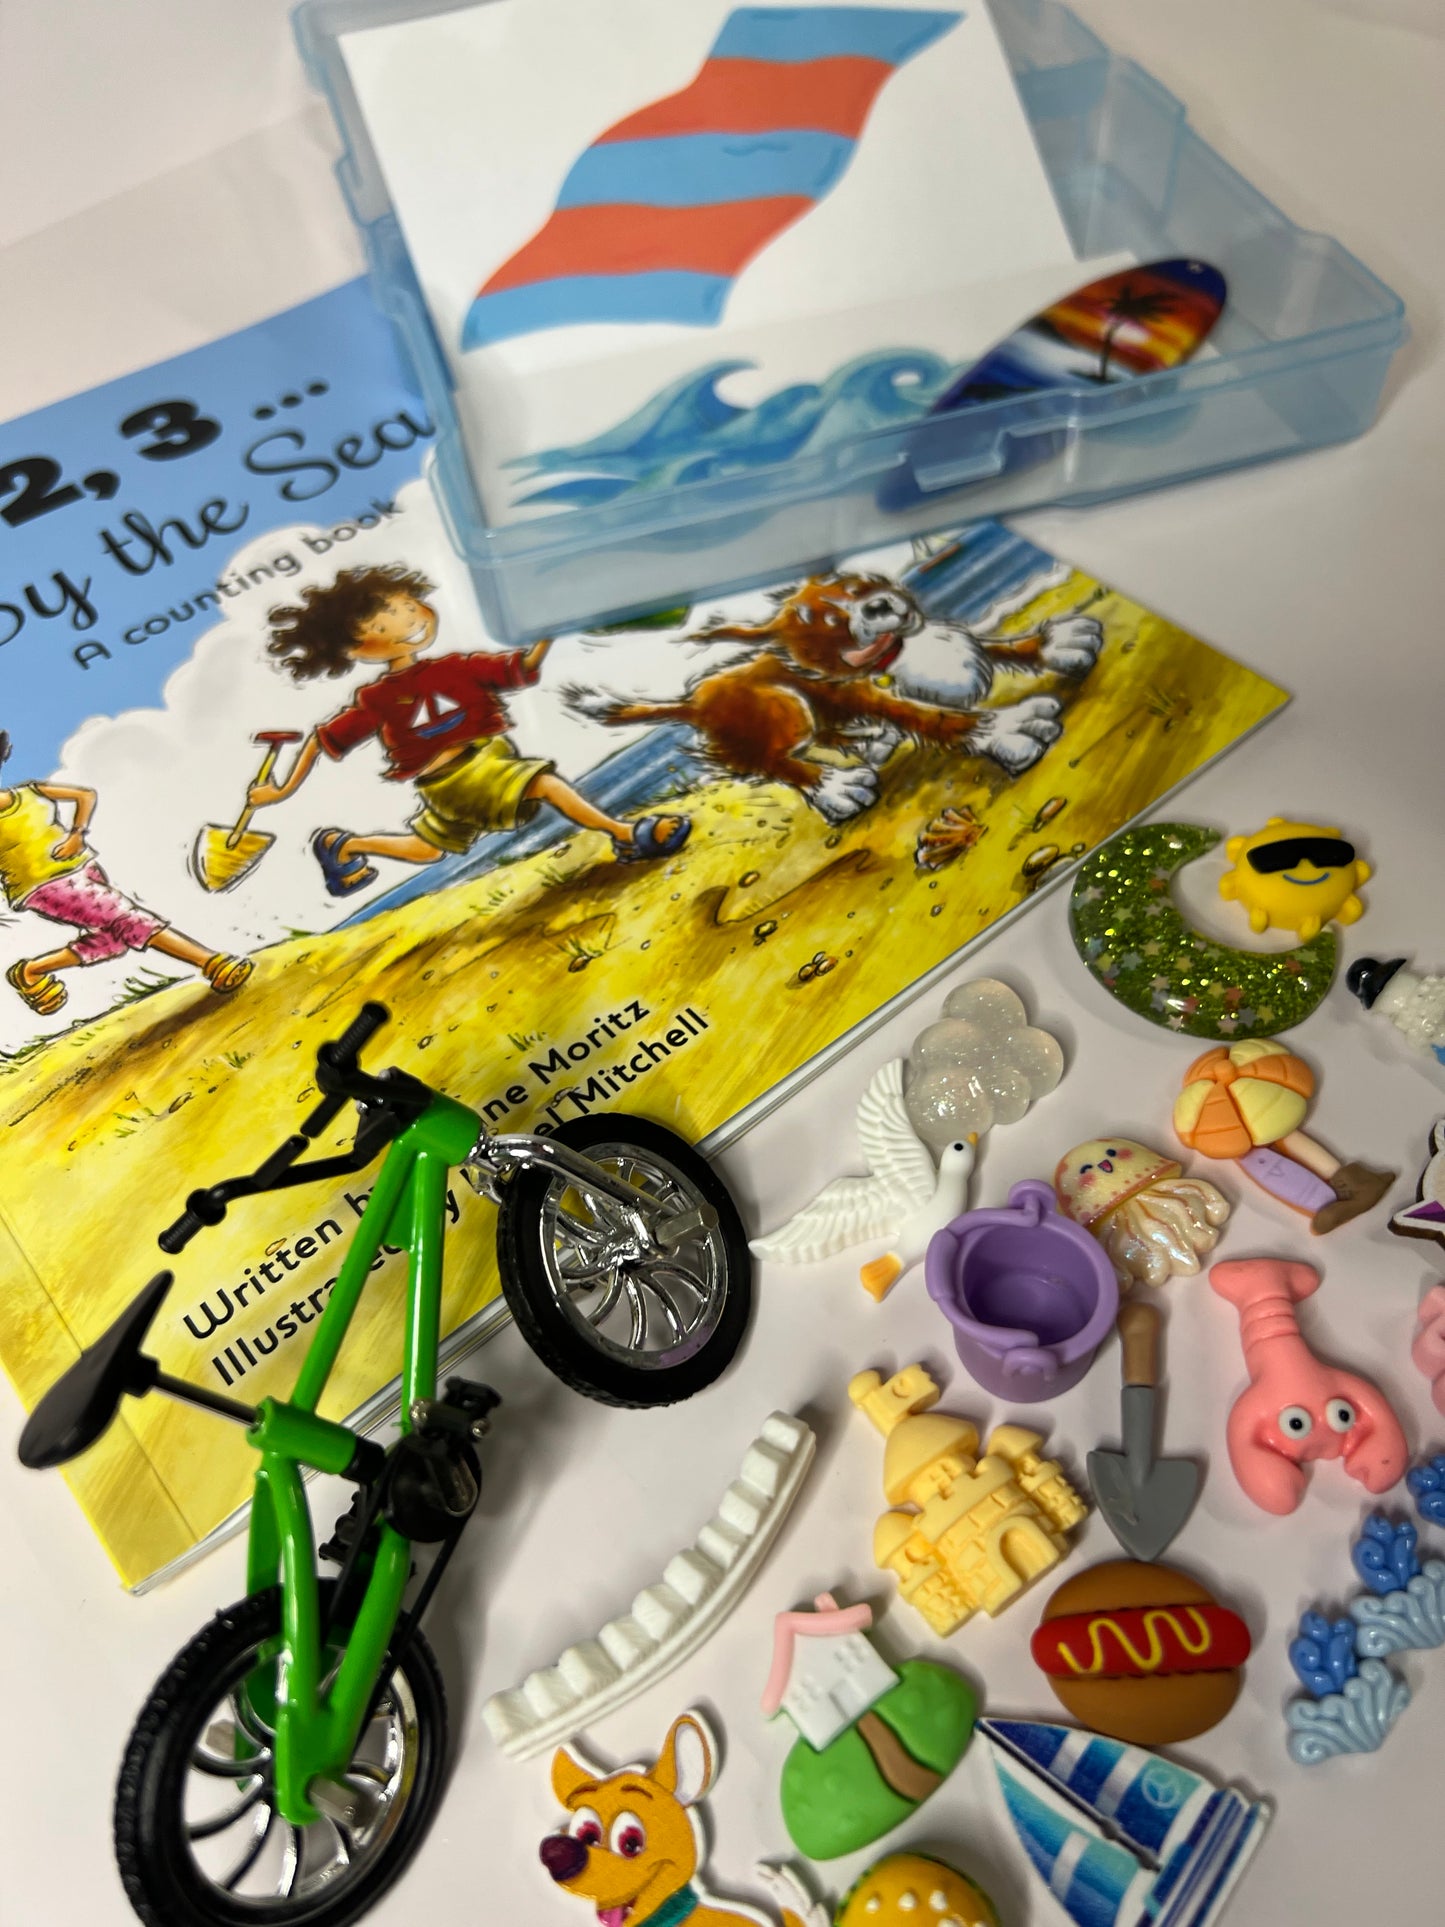 1, 2, 3 ... by the Sea Paperback Picture Book Story Kit Question Book Story Objects Speech Therapy Mini Objects